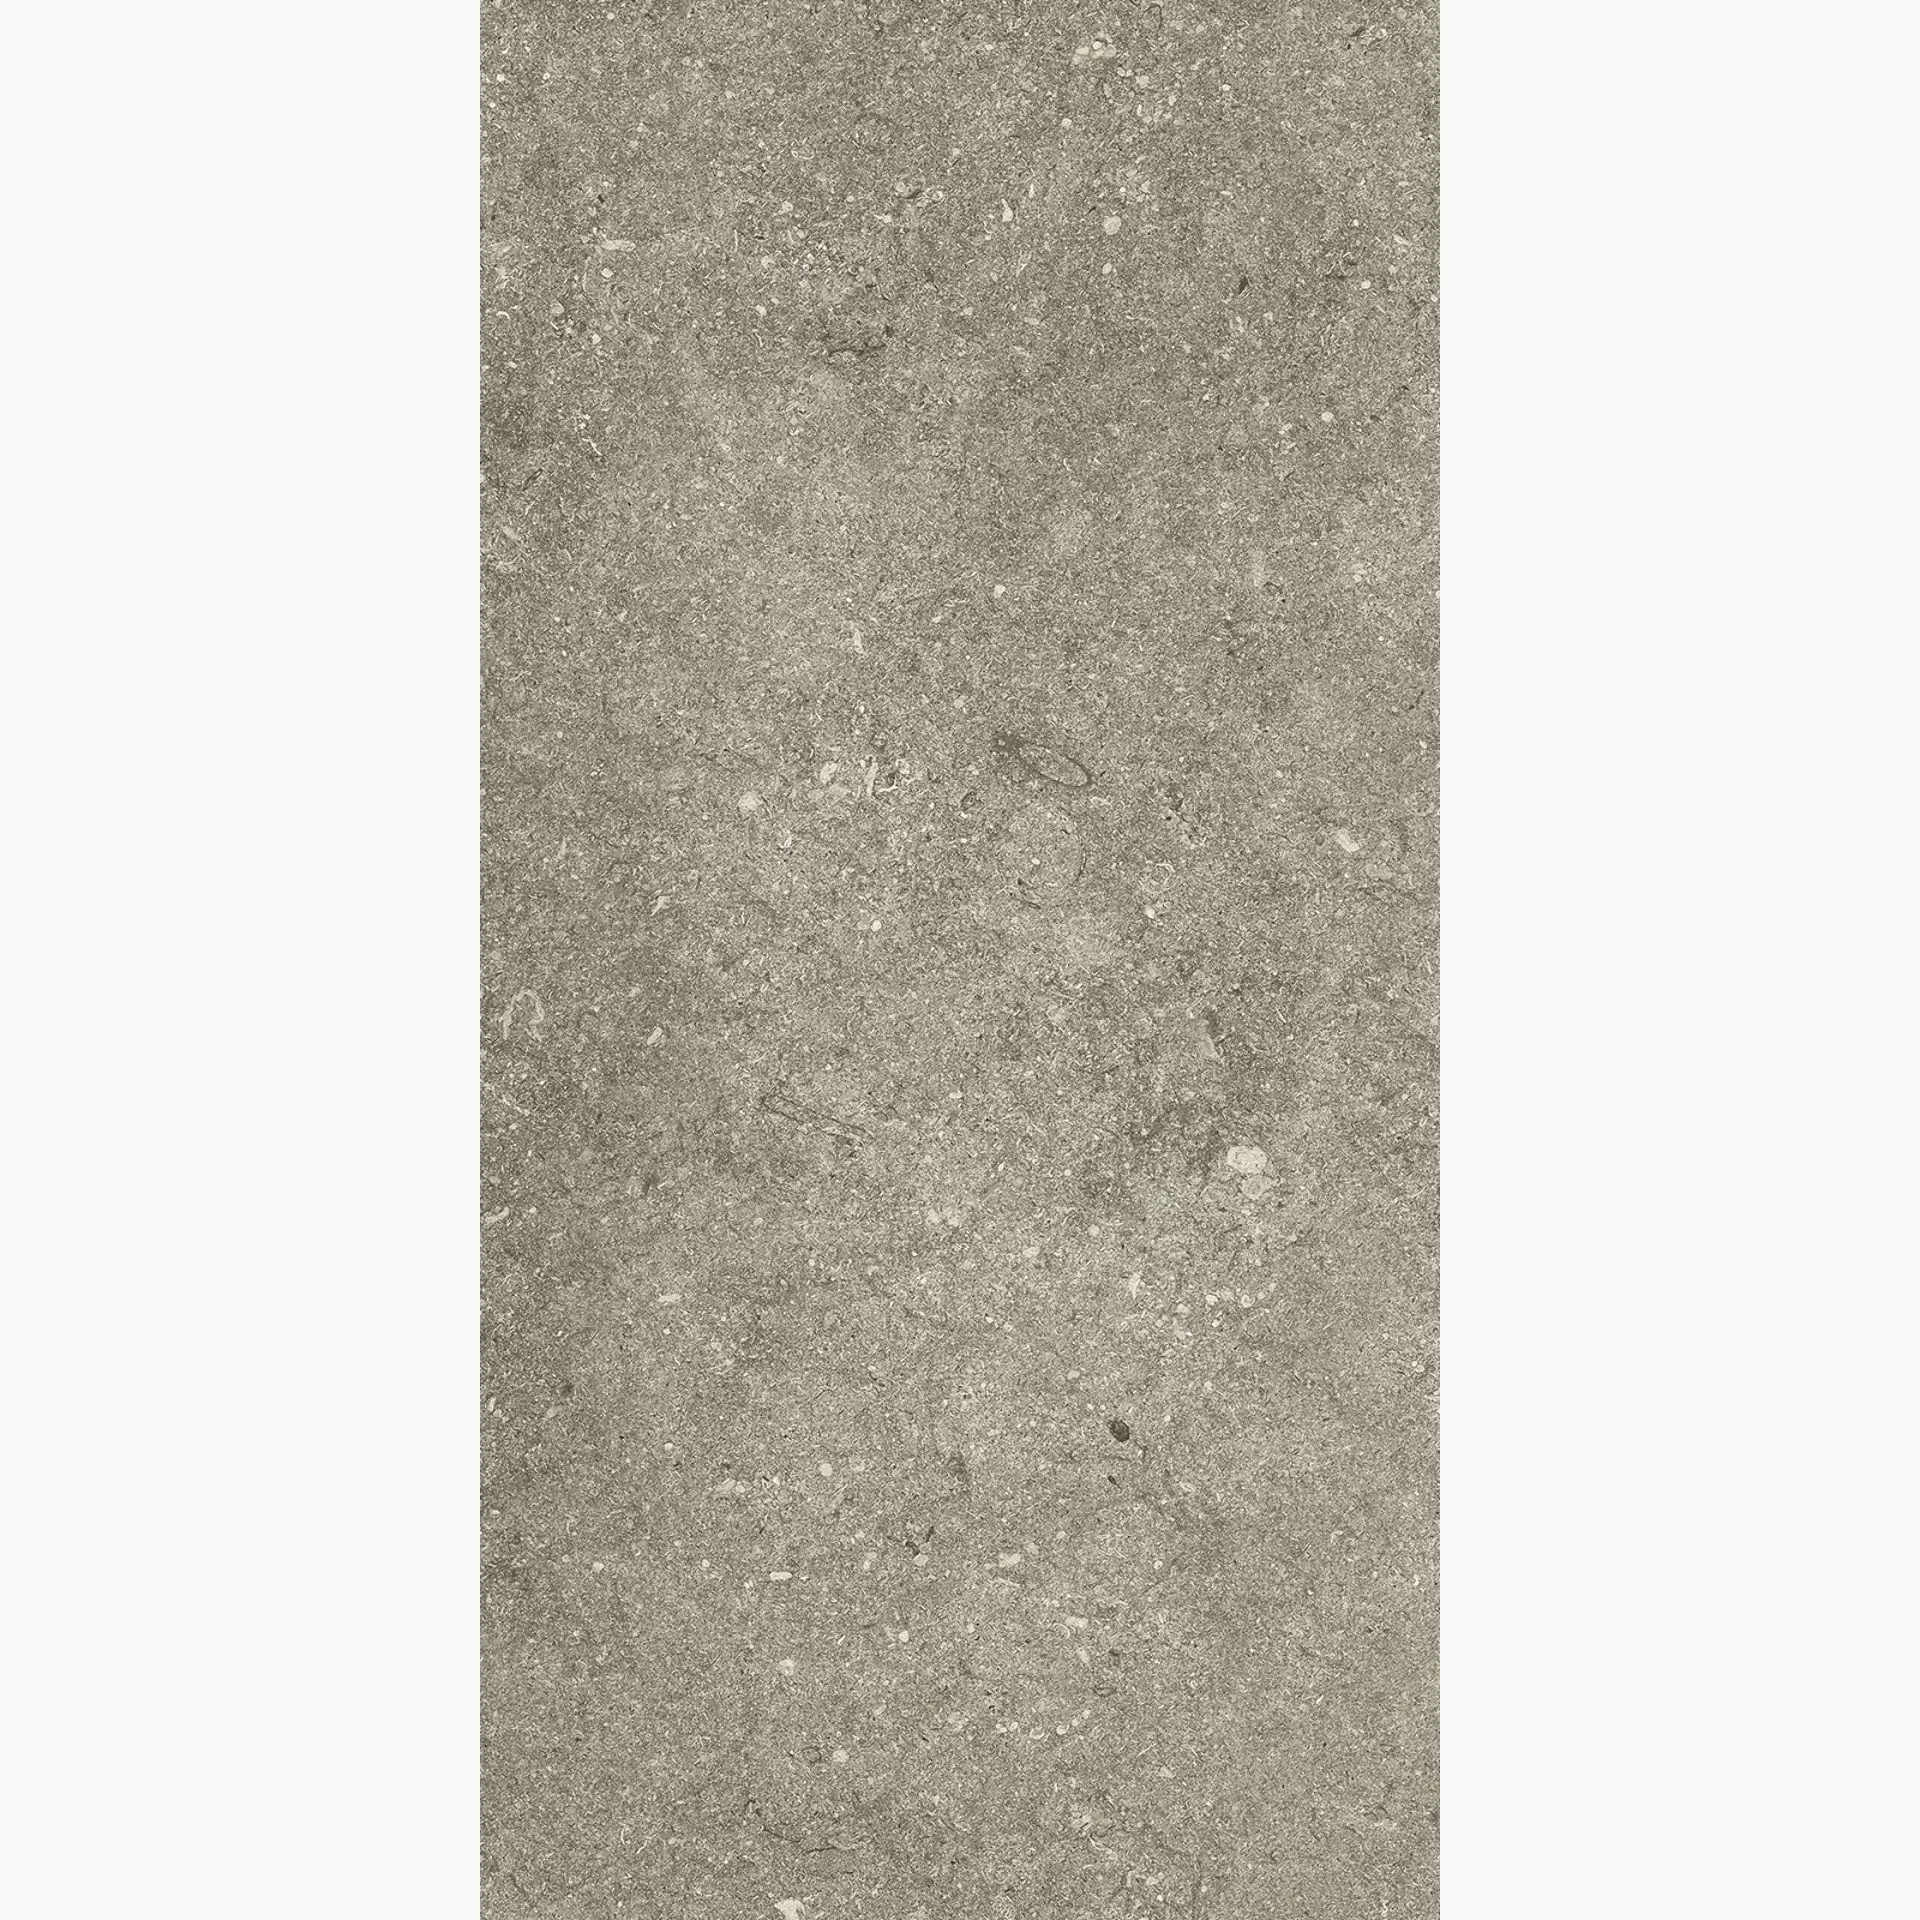 KRONOS Le Reverse Taupe Elegance Lappato RS068 40x80cm rectified 9mm